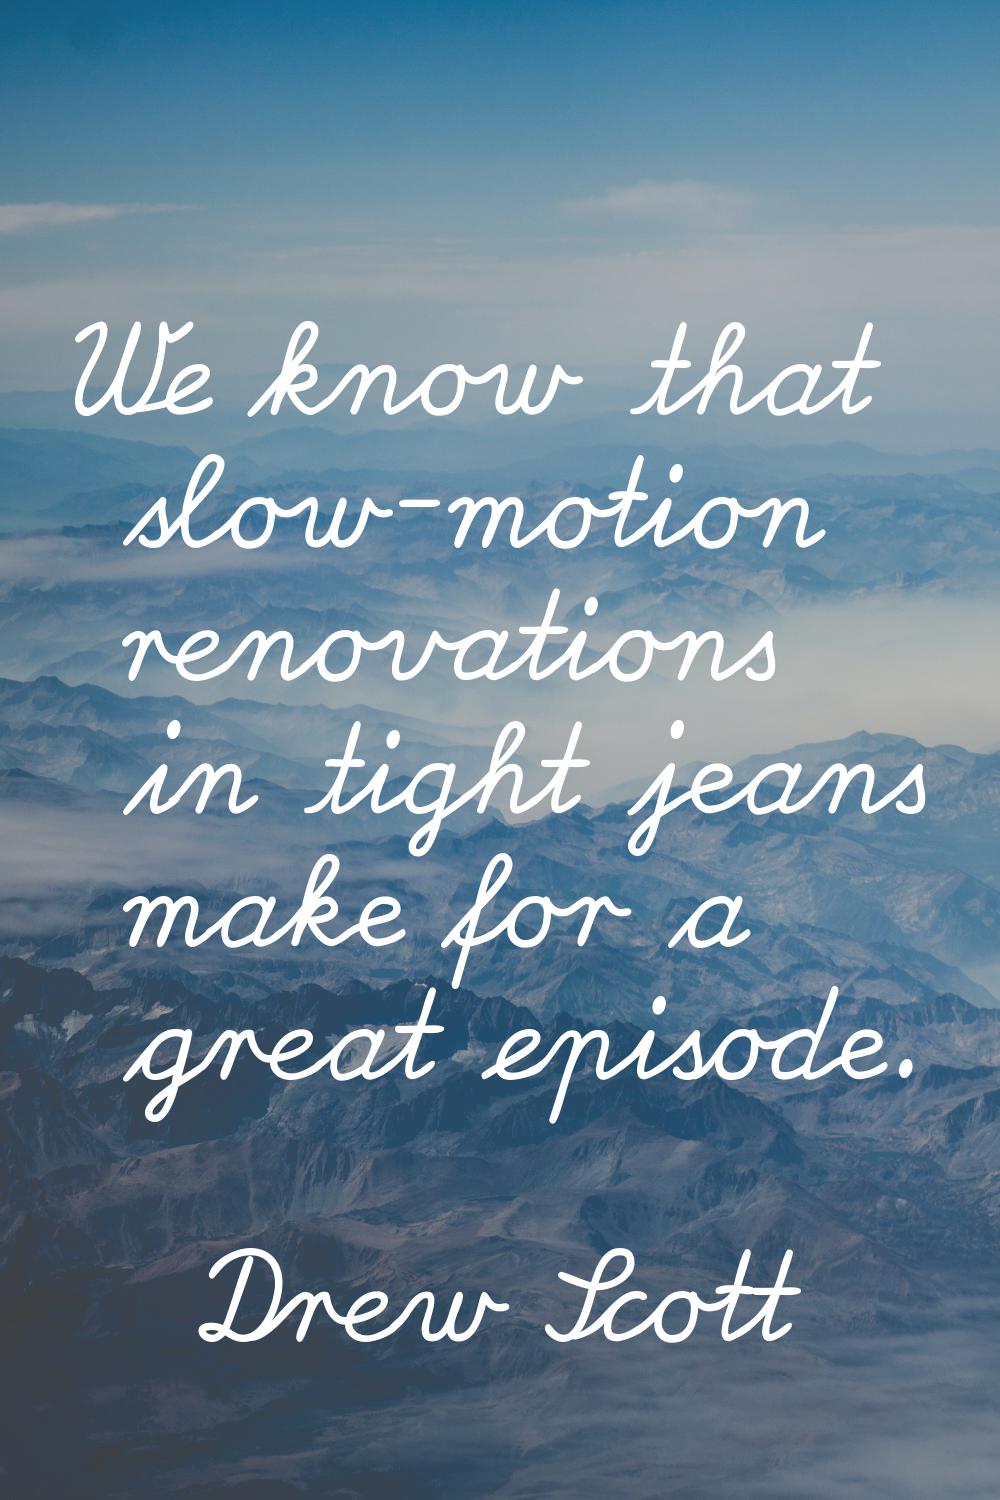 We know that slow-motion renovations in tight jeans make for a great episode.